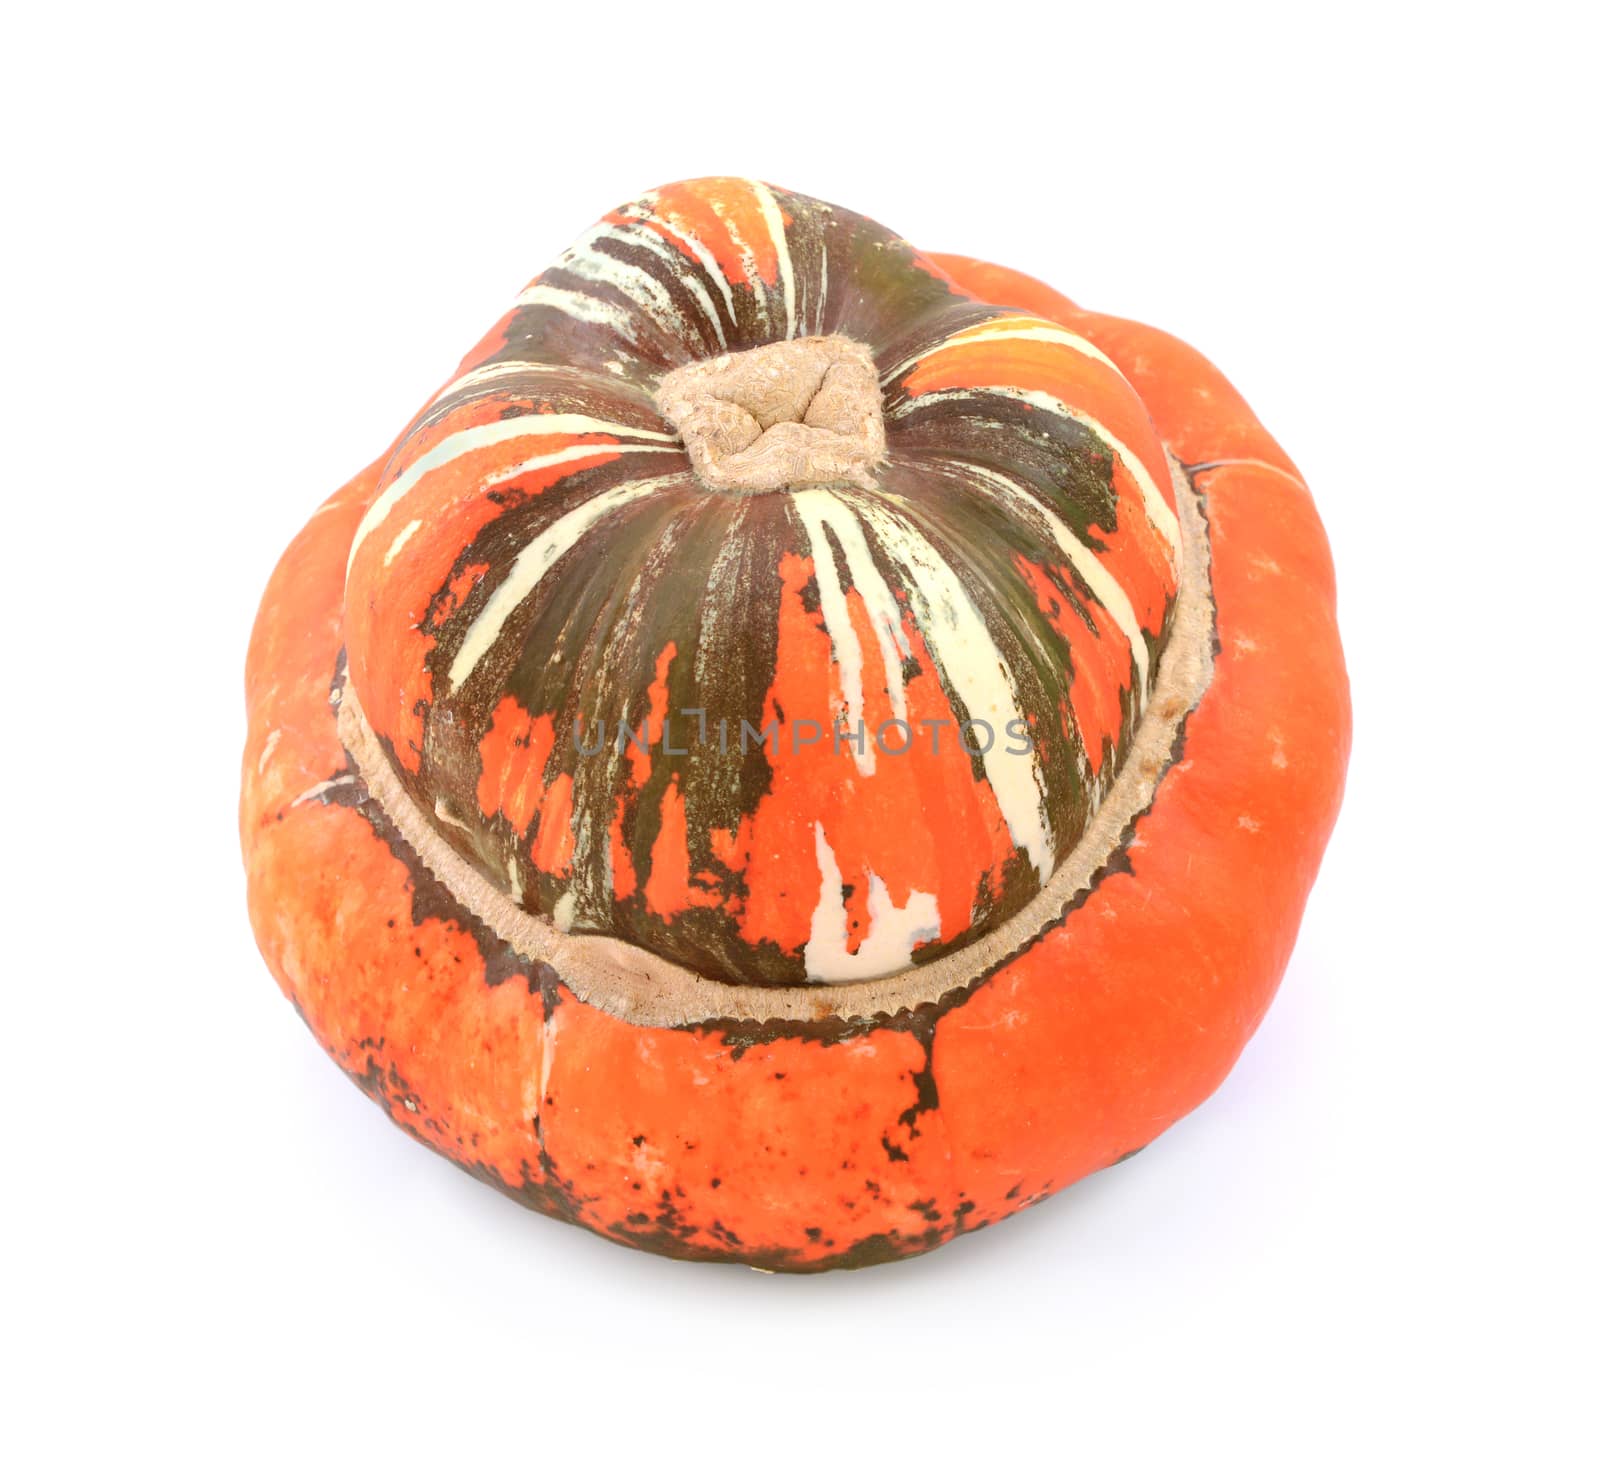 Large Turks Turban gourd with dark brown and orange stripes by sarahdoow